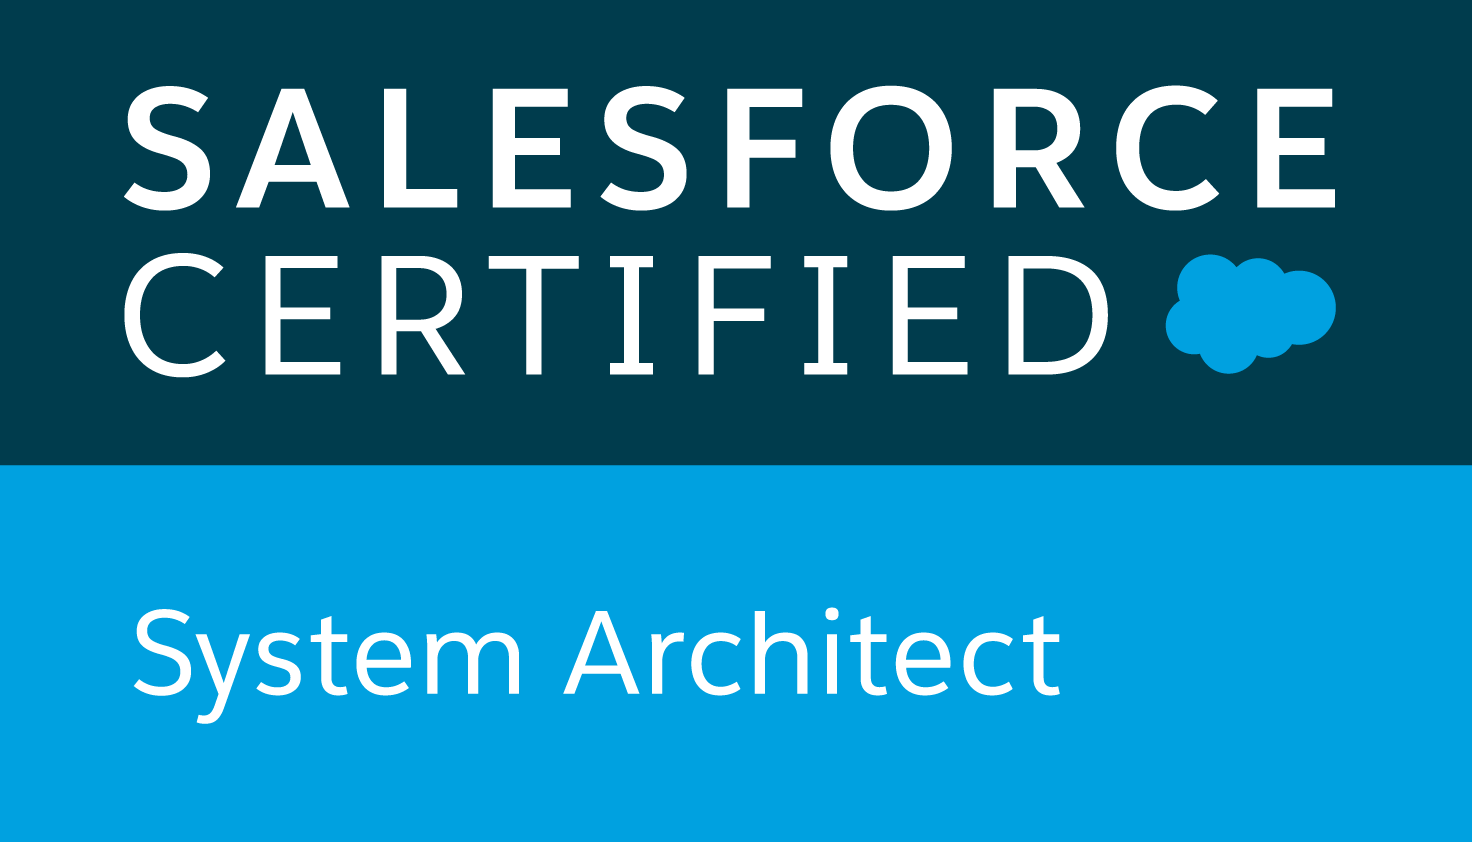 Certified System Architect